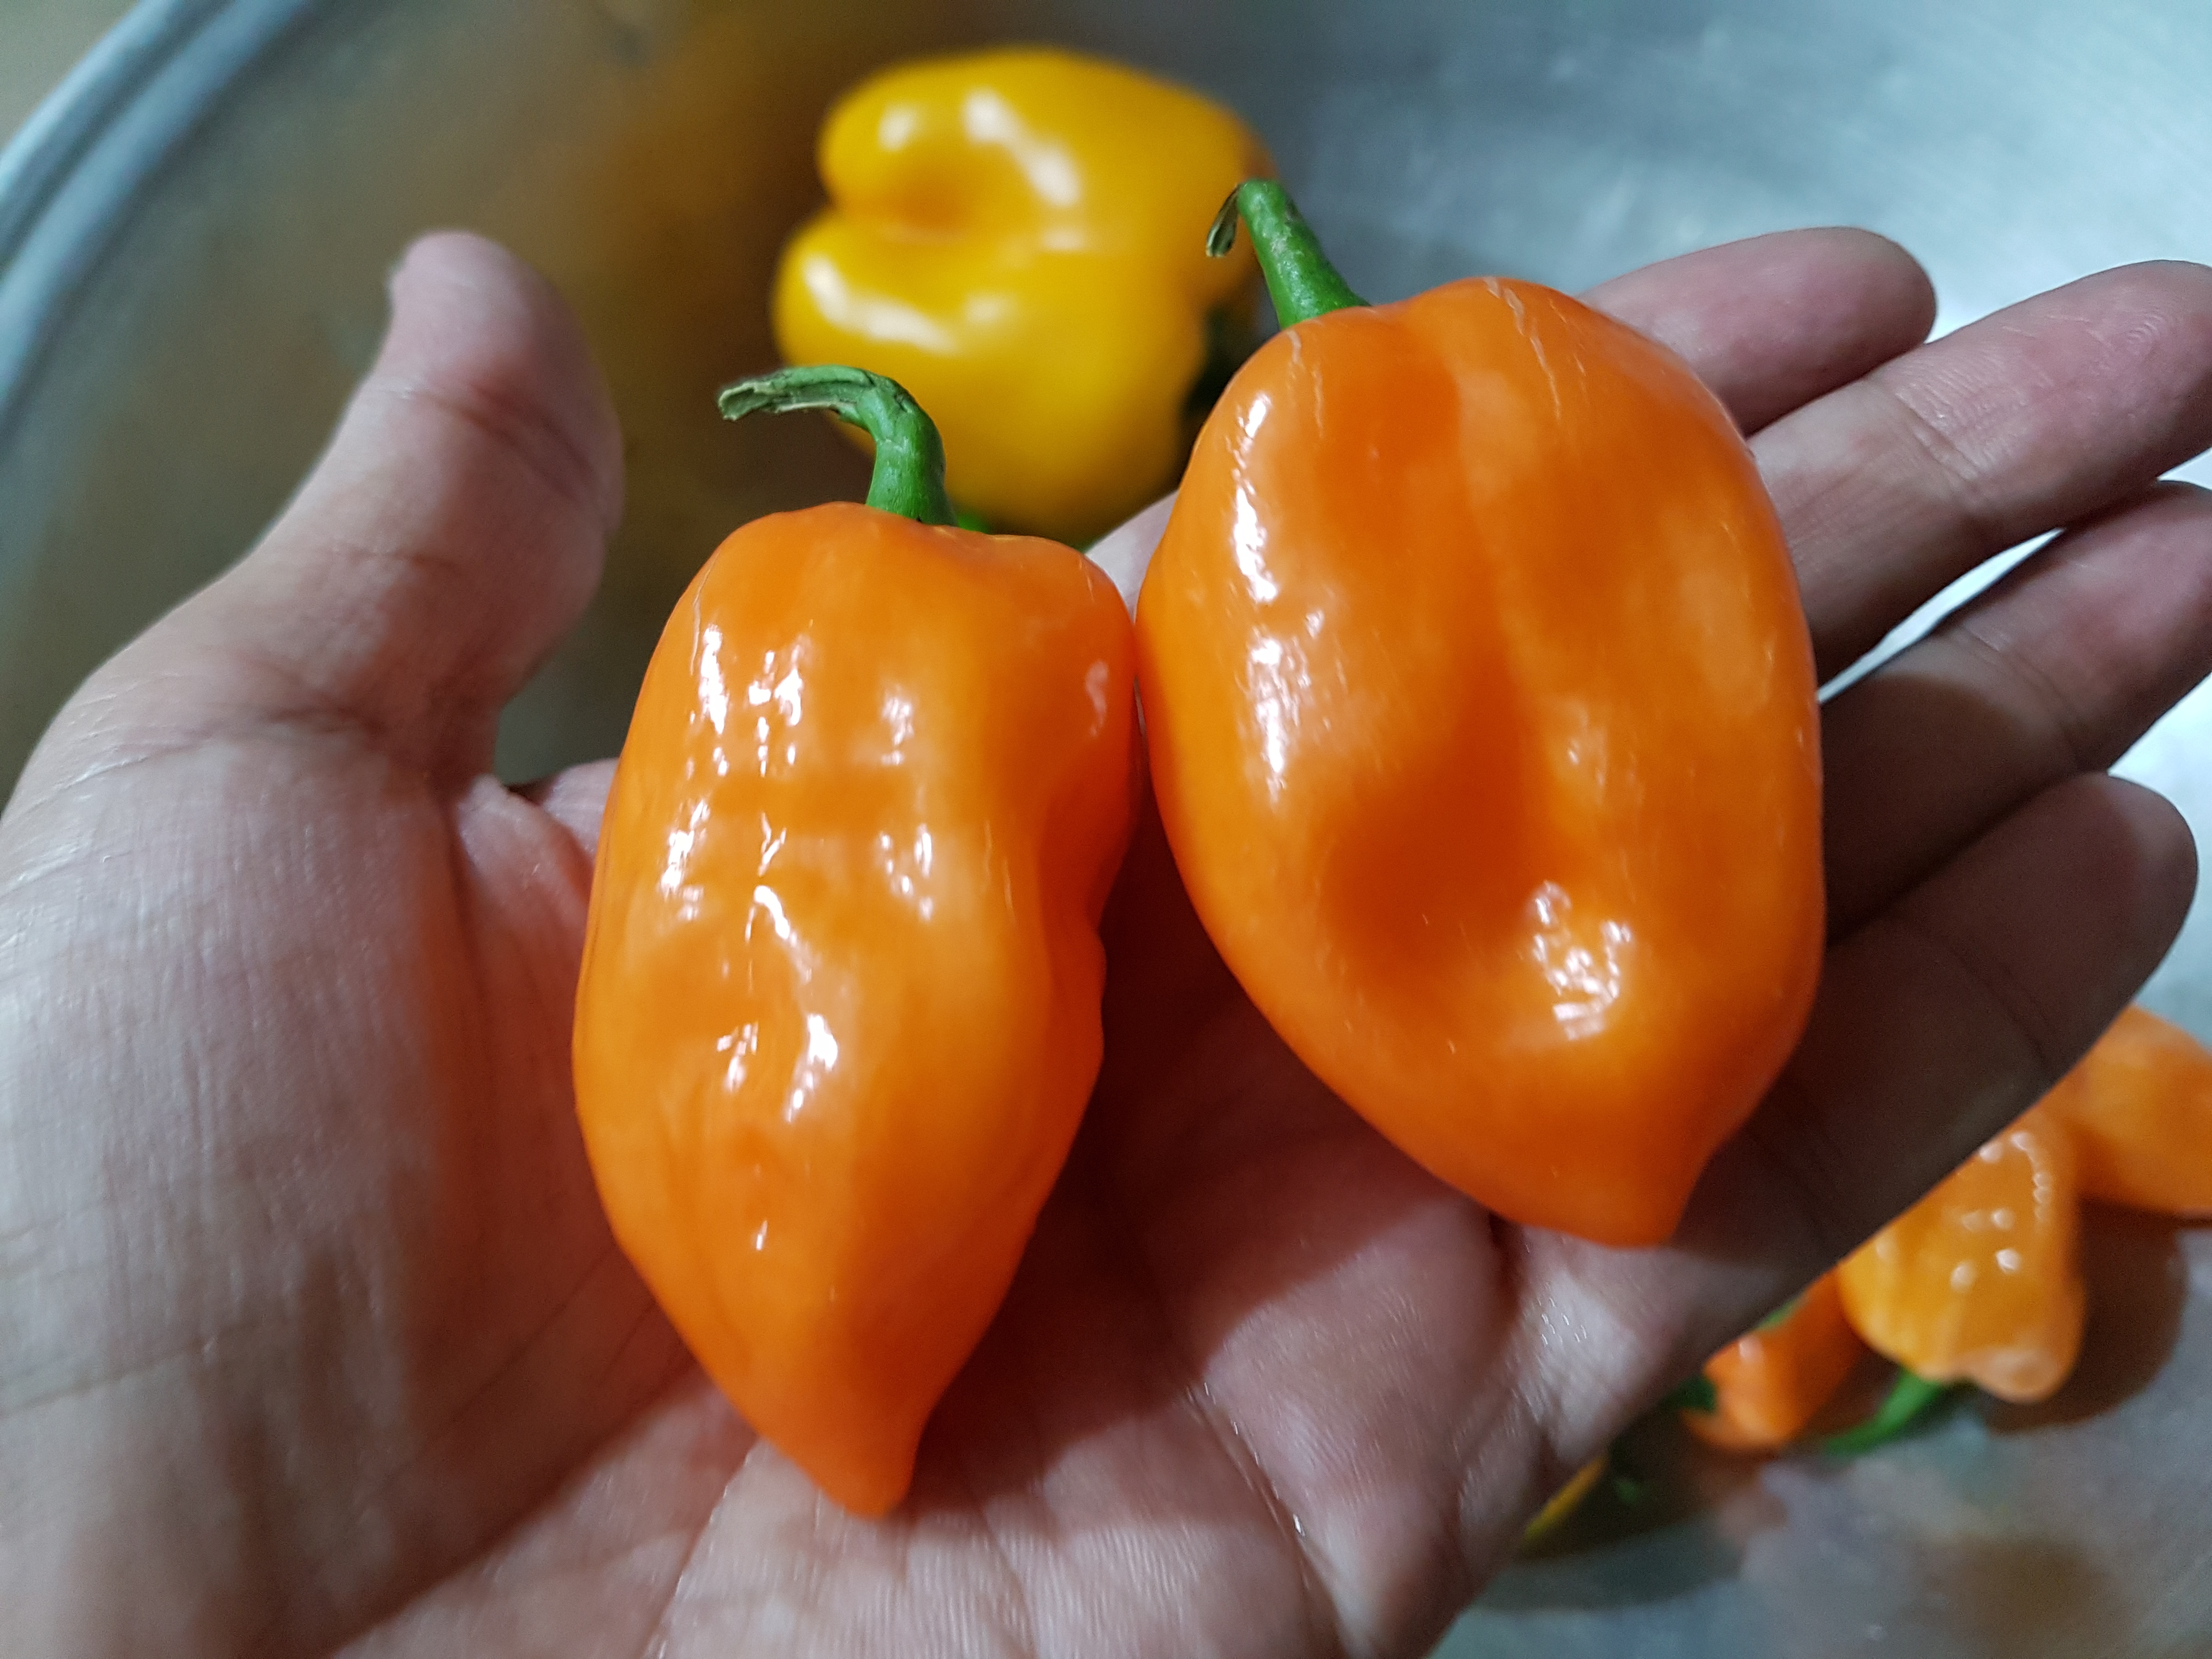 Harvested-Orange-Habanero-and-Rijk-Zwan-Bachata-Capsicum-from-Deep-Water-Culture-System